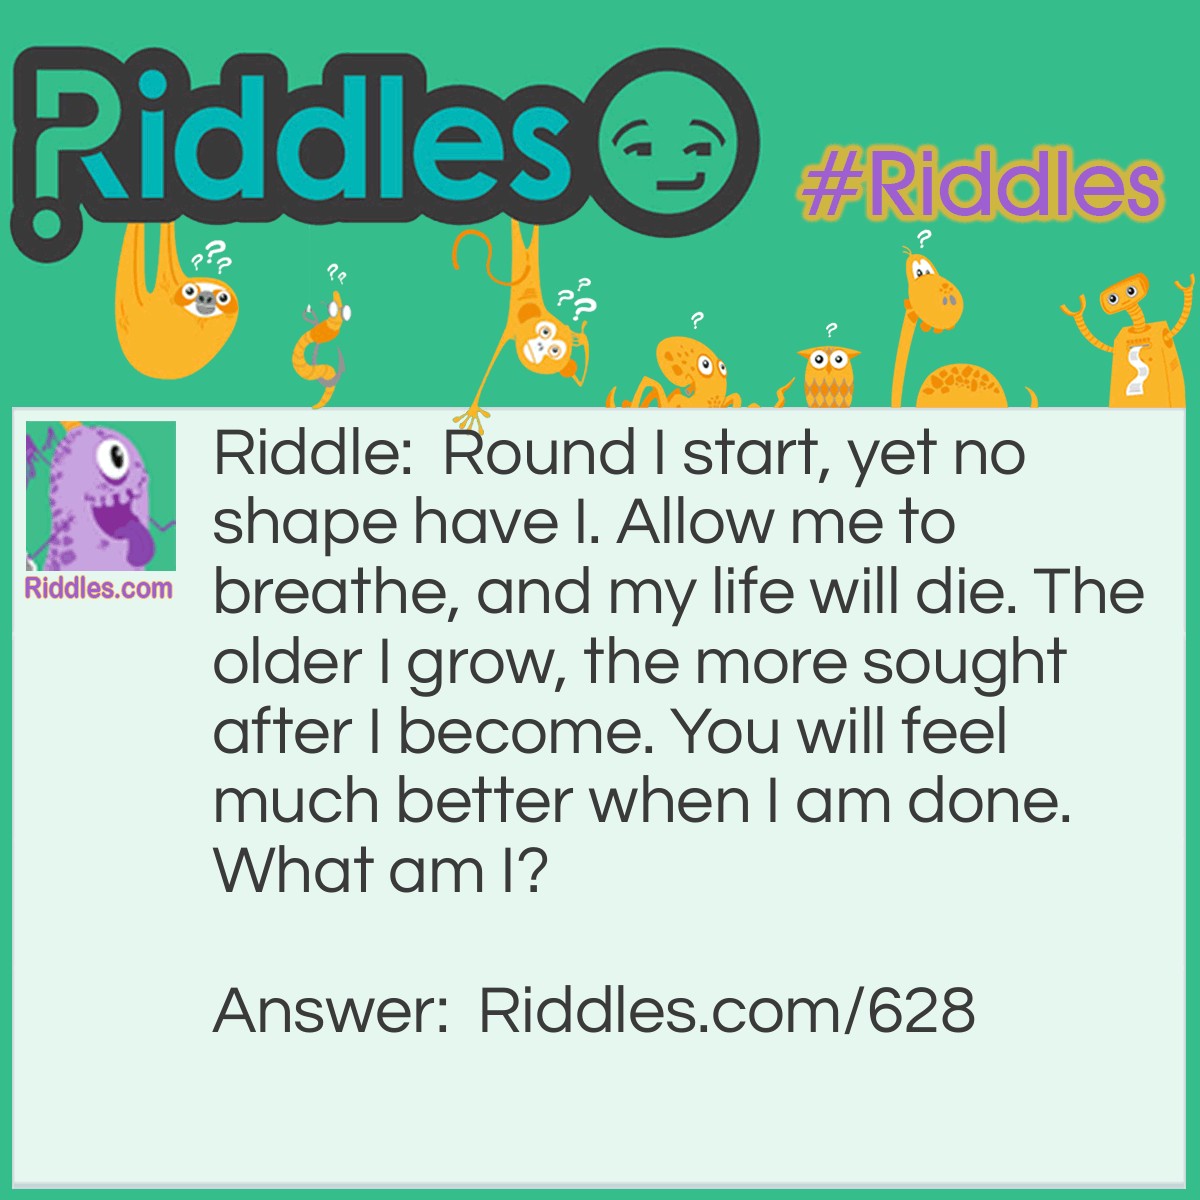 Riddle: Round I start, yet no shape have I. Allow me to breathe, and my life will die. The older I grow, the more sought after I become. You will feel much better when I am done.
What am I? Answer: A bottle of wine.